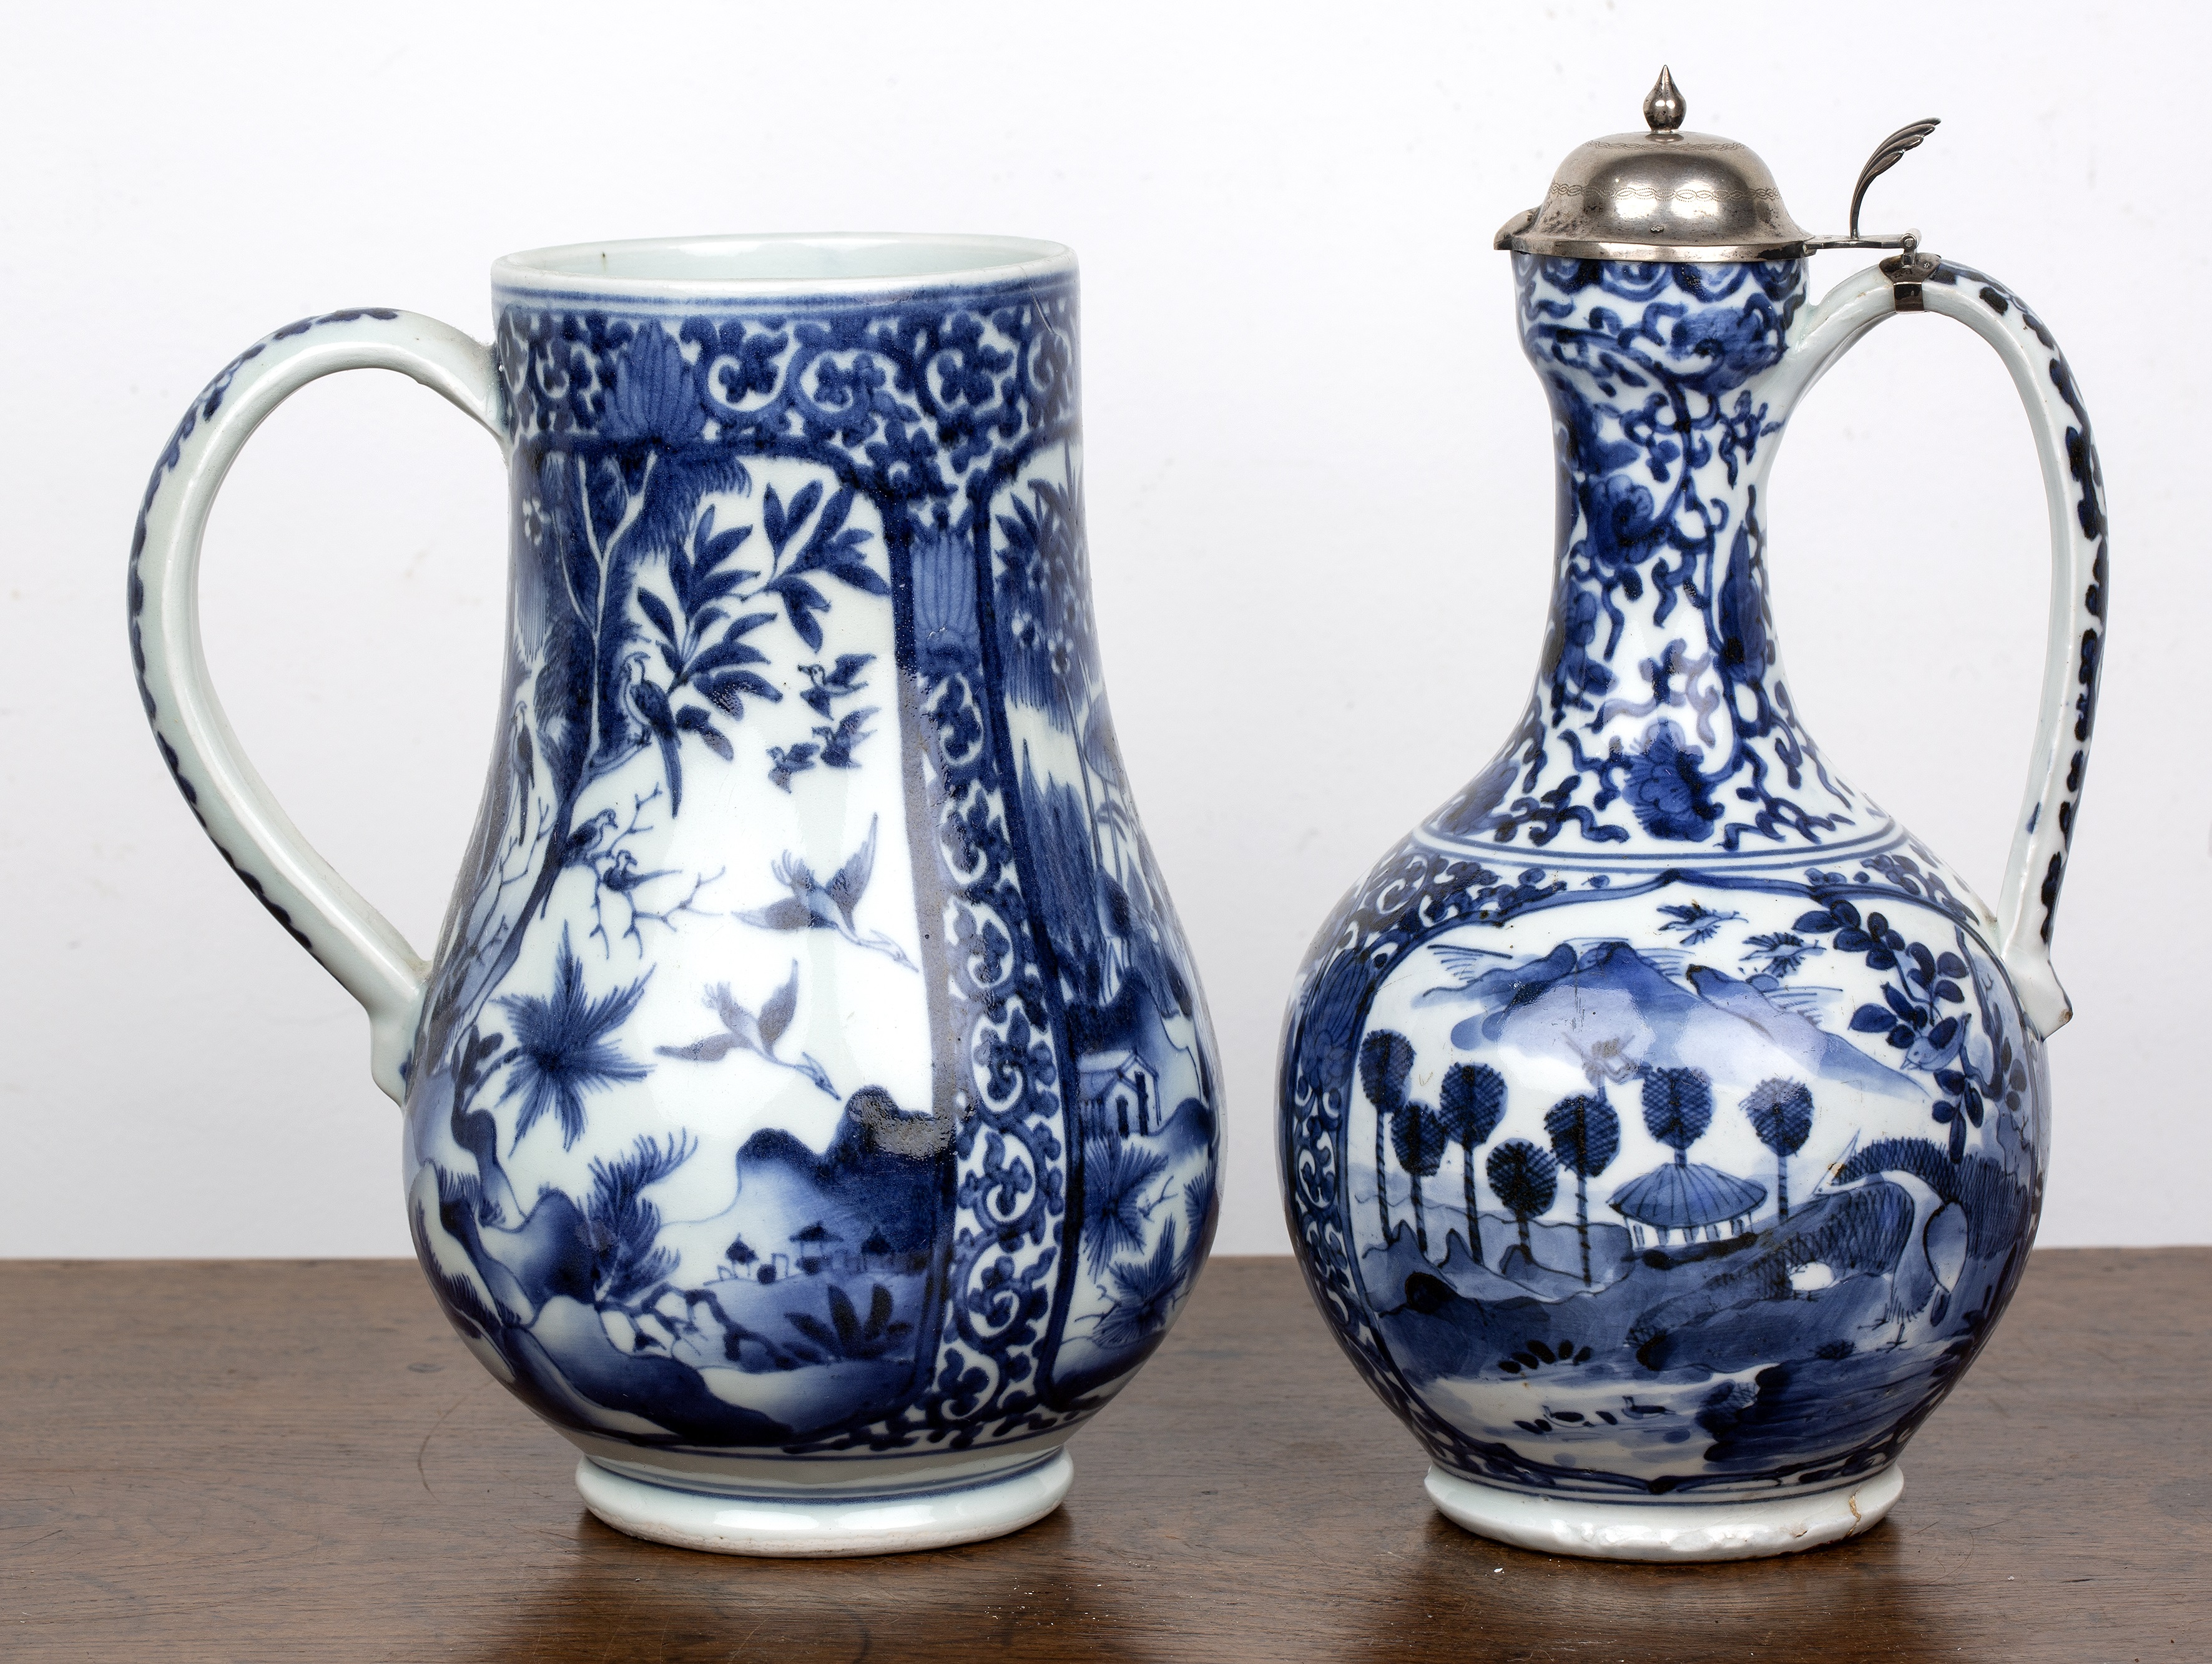 Blue and white porcelain Arita and a tankard Japanese, circa 1700 both with panels of landscape - Image 3 of 6